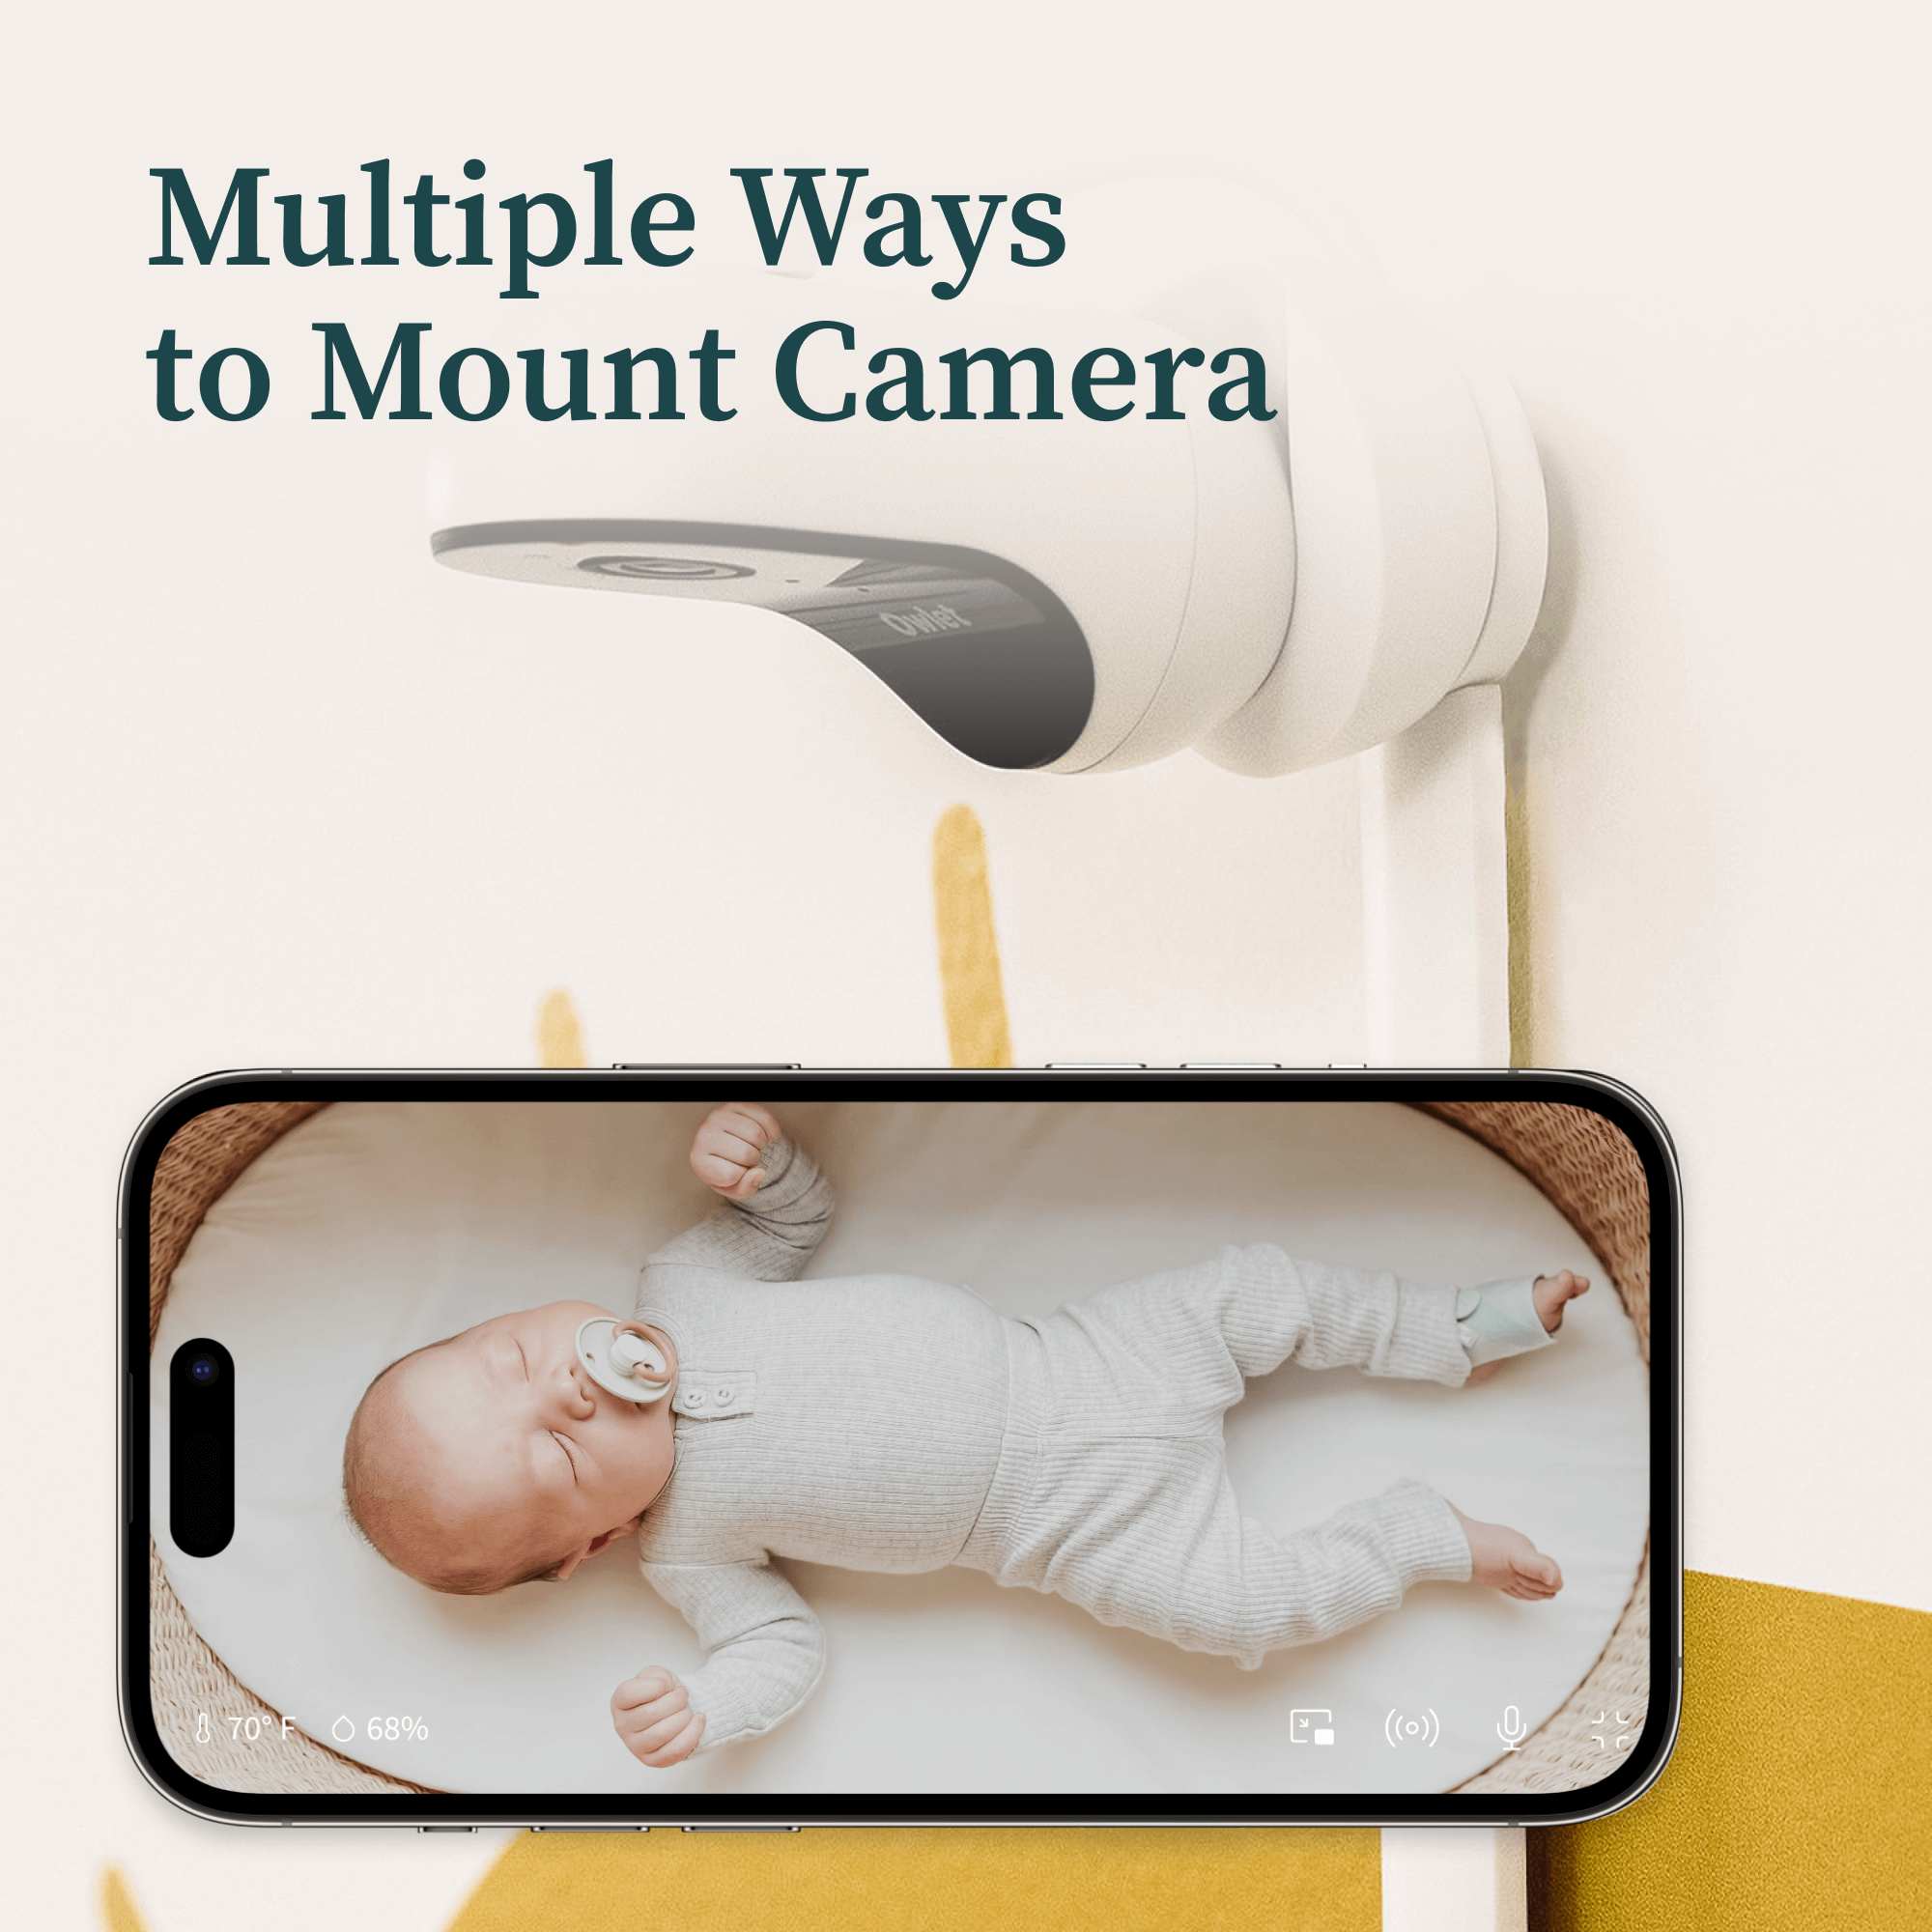 Owlet Cam Smart HD Video Baby Monitor - Single Cam